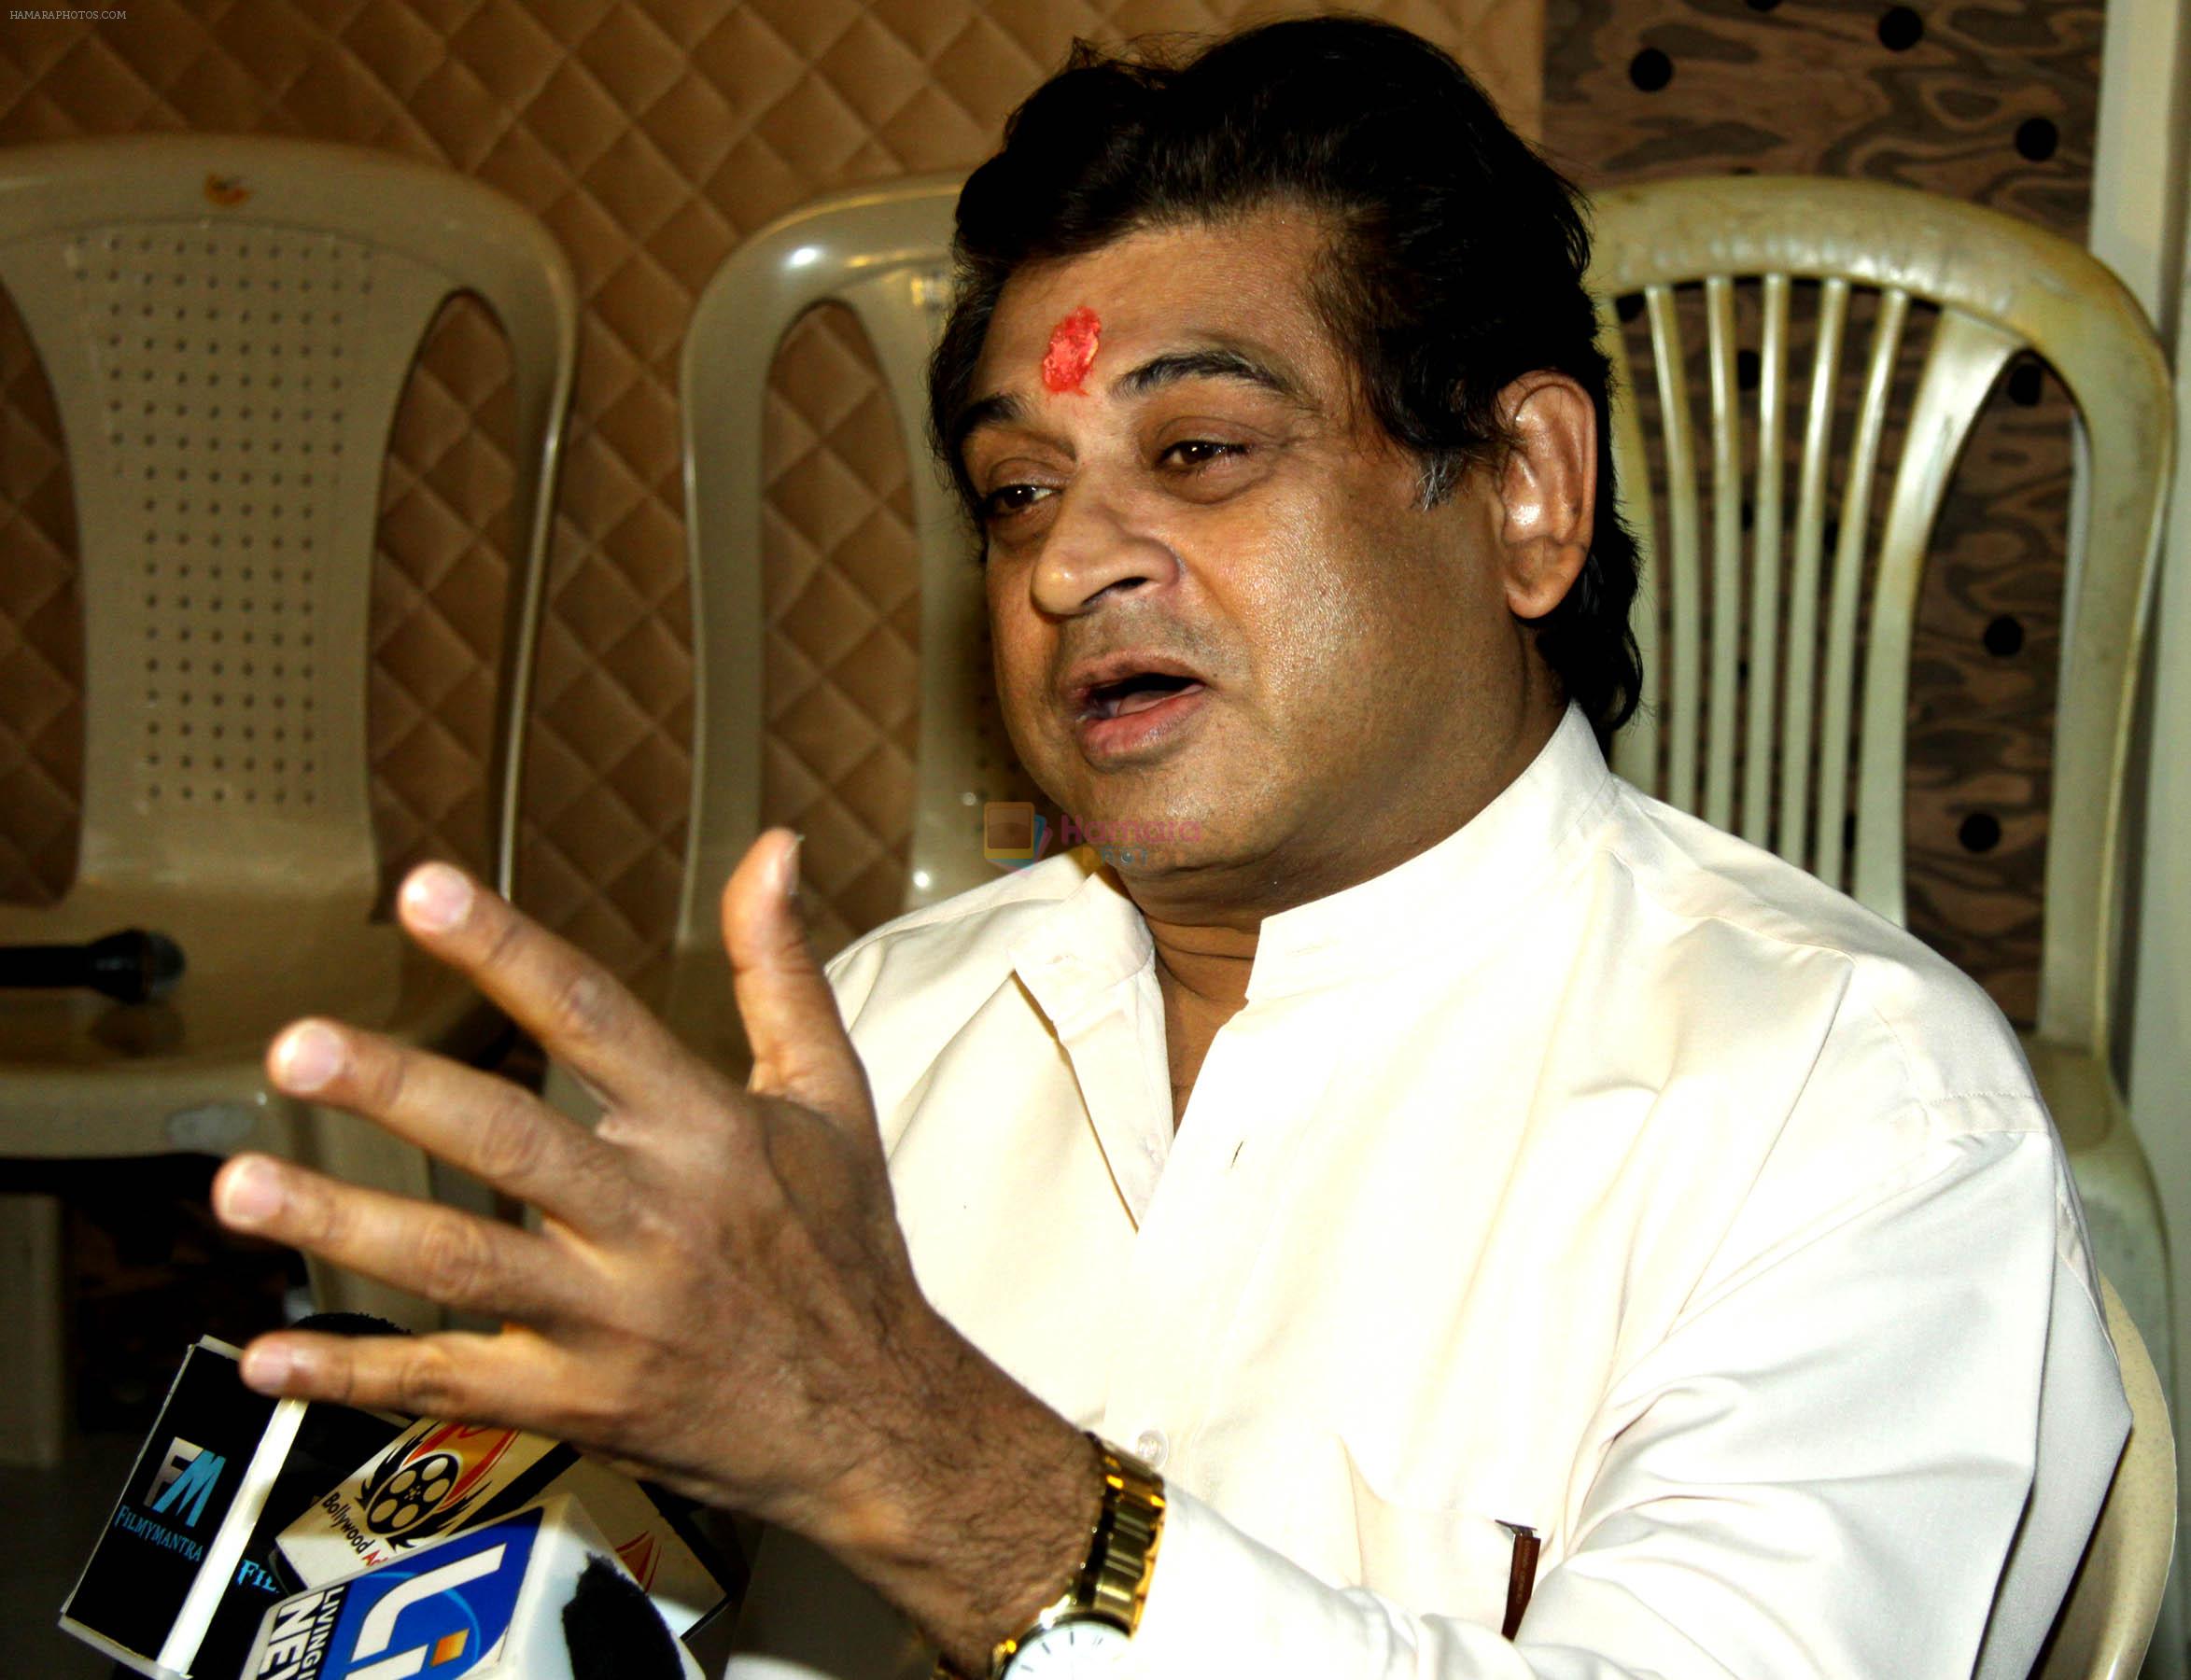 Amit Kumar will celebrate 50 Golden years in singing on 9th Dec at Shanmukhanand Hall,Sion